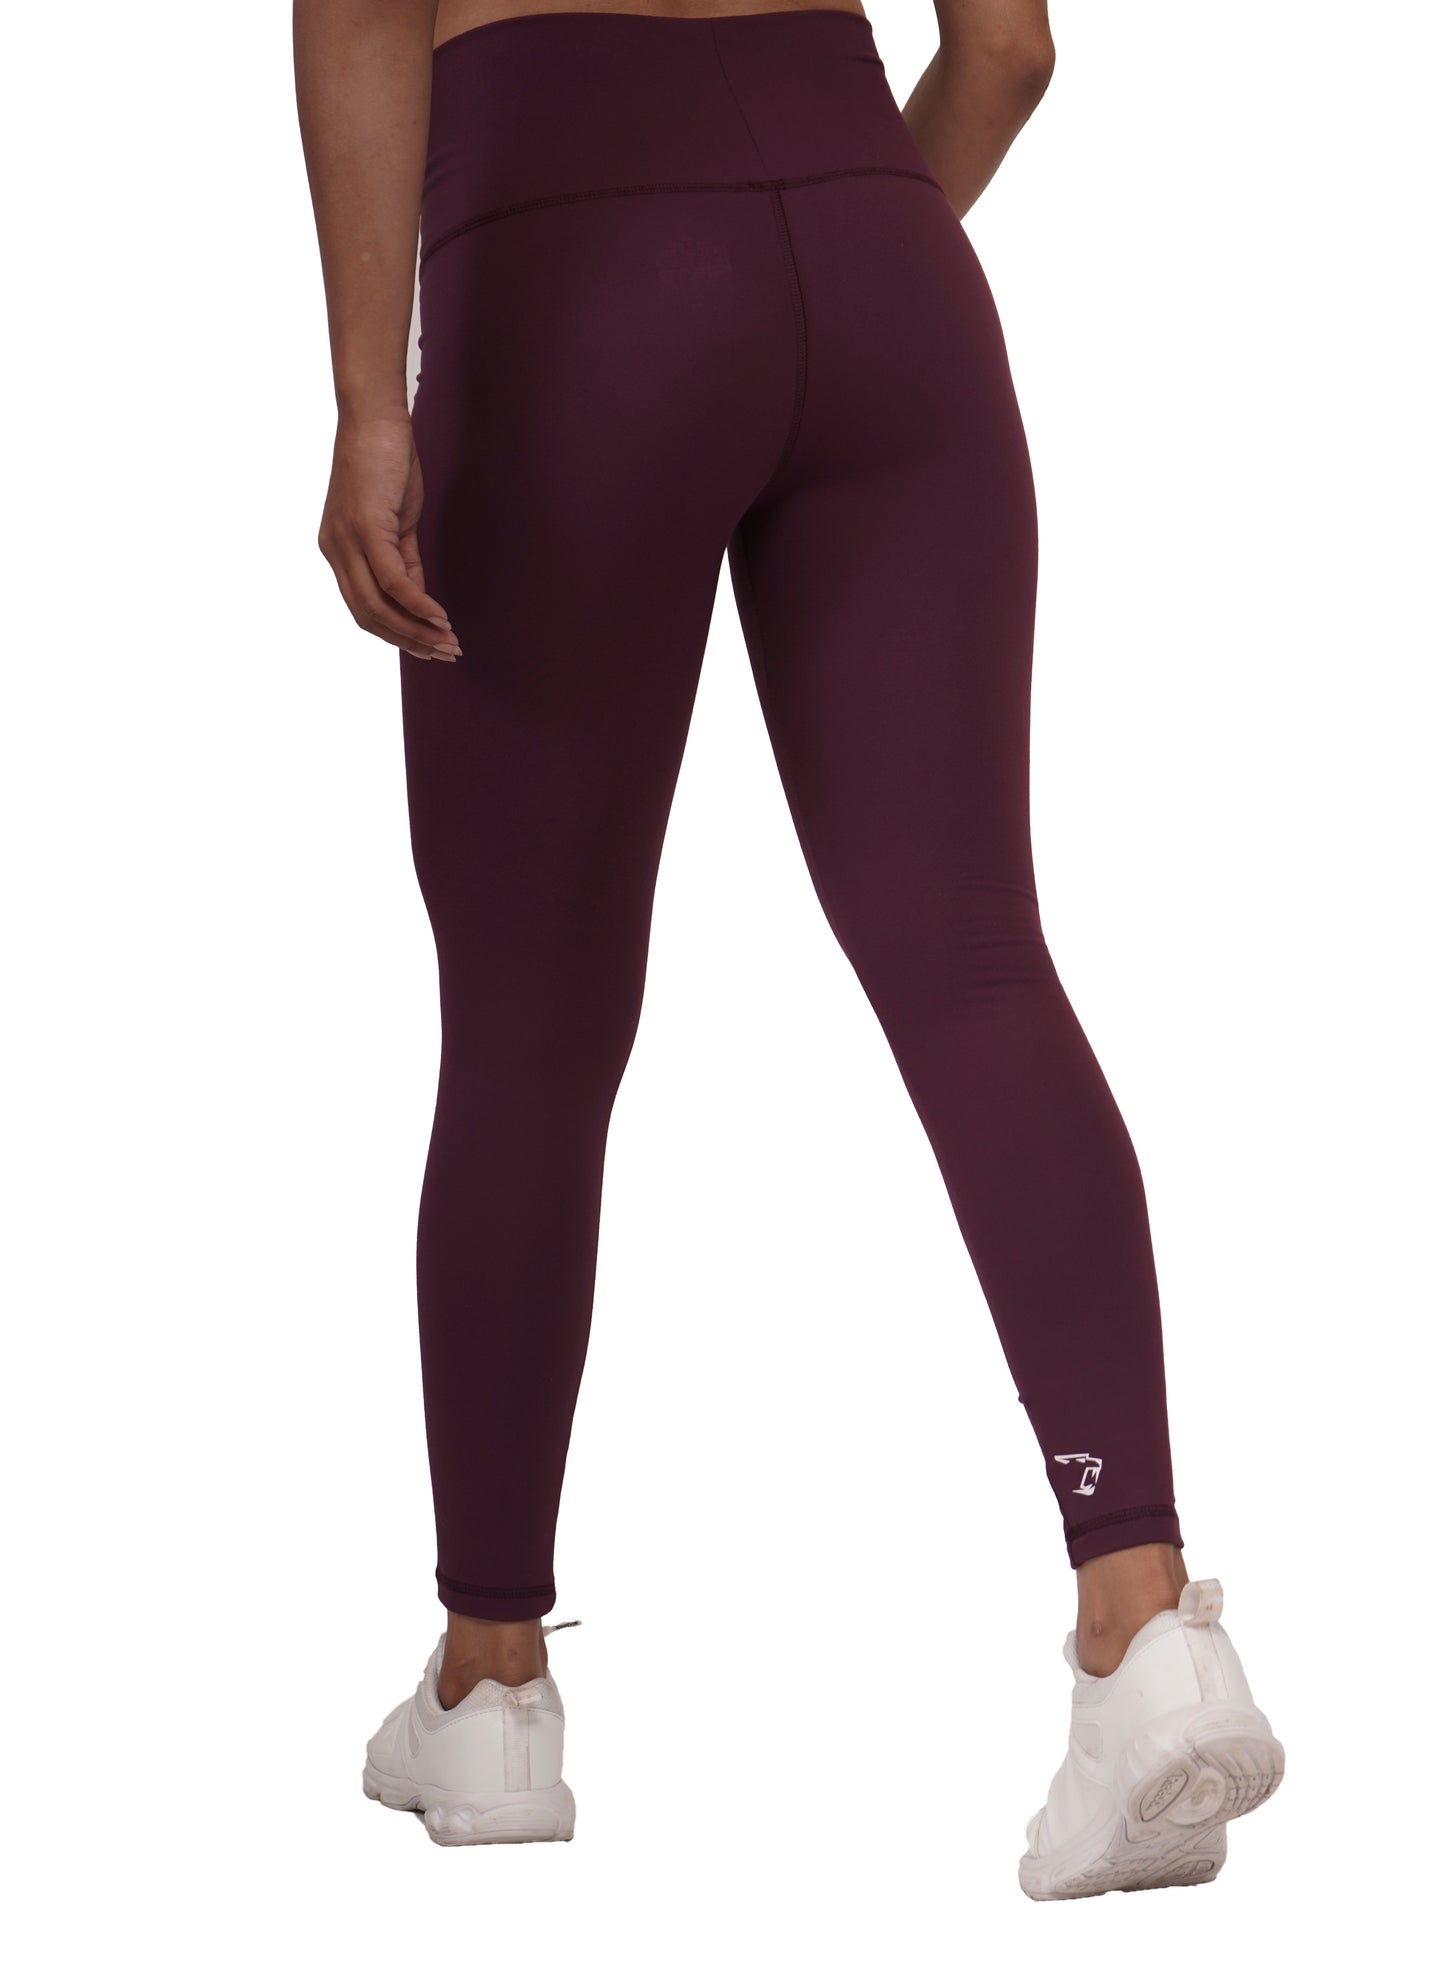 Active Wear Tights for women